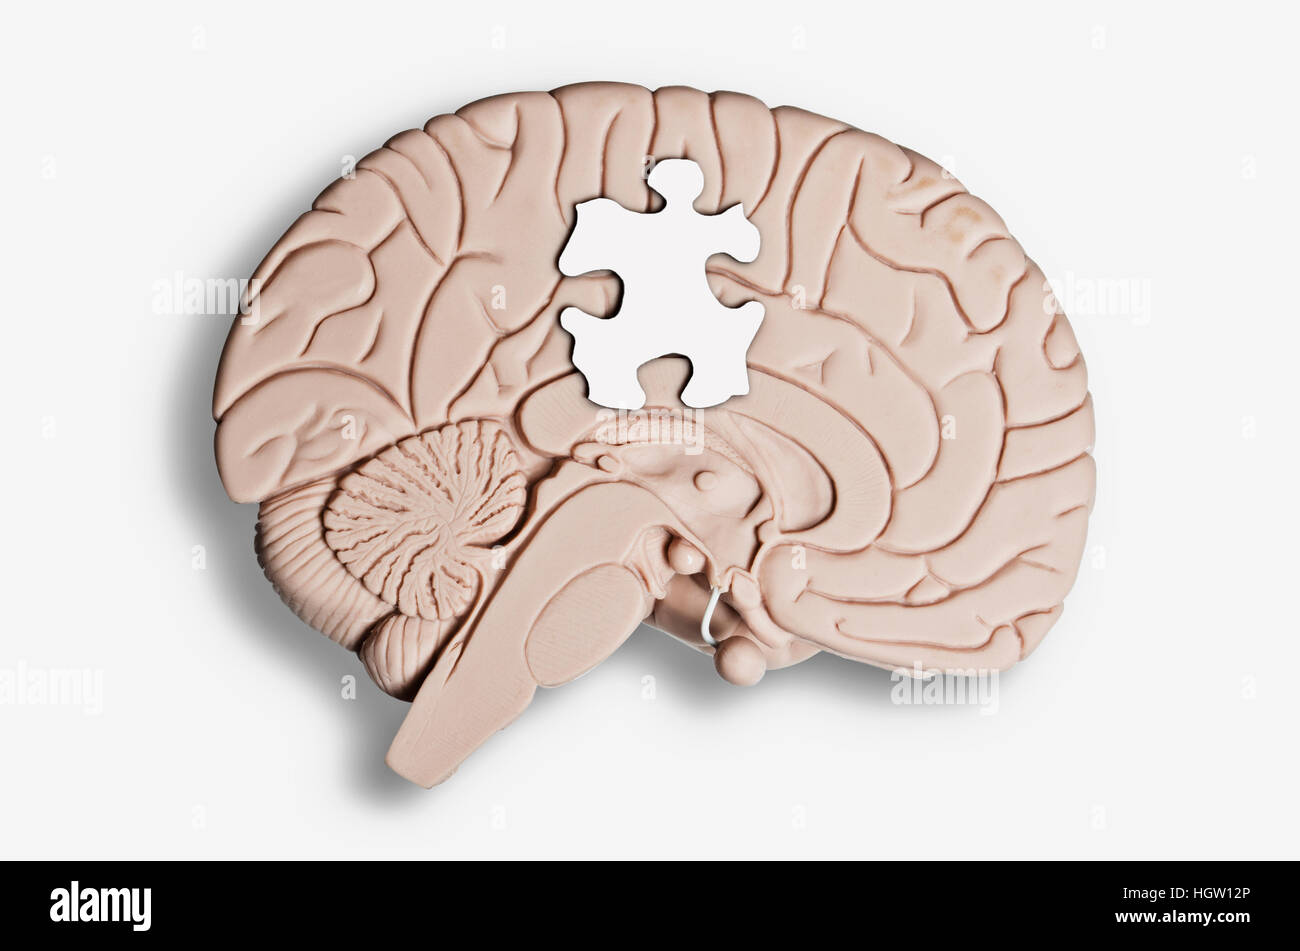 Puzzle Piece Placed On A Brain Model Stock Photo